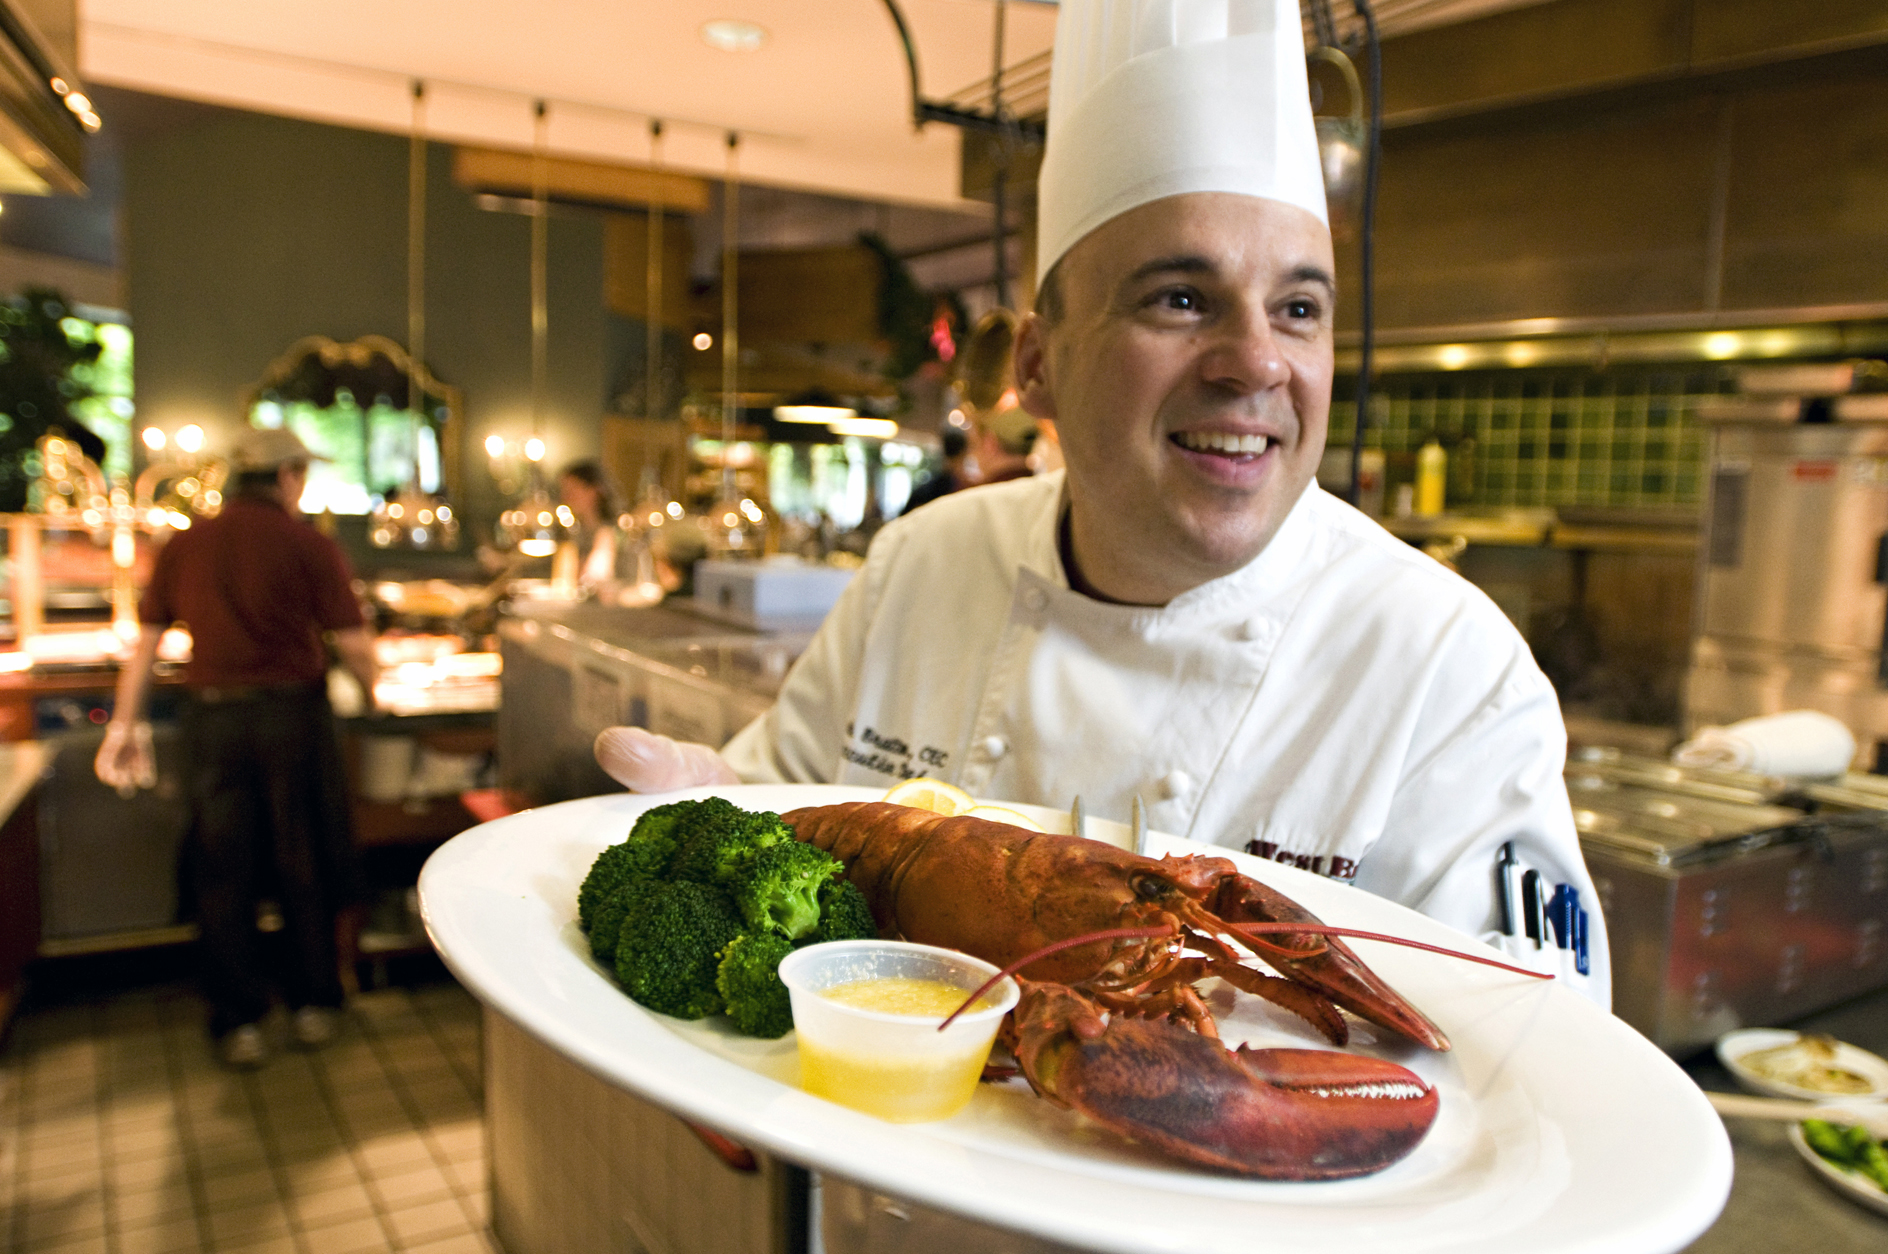 Executive Chef Mark Bratton serves lobster at West End Market